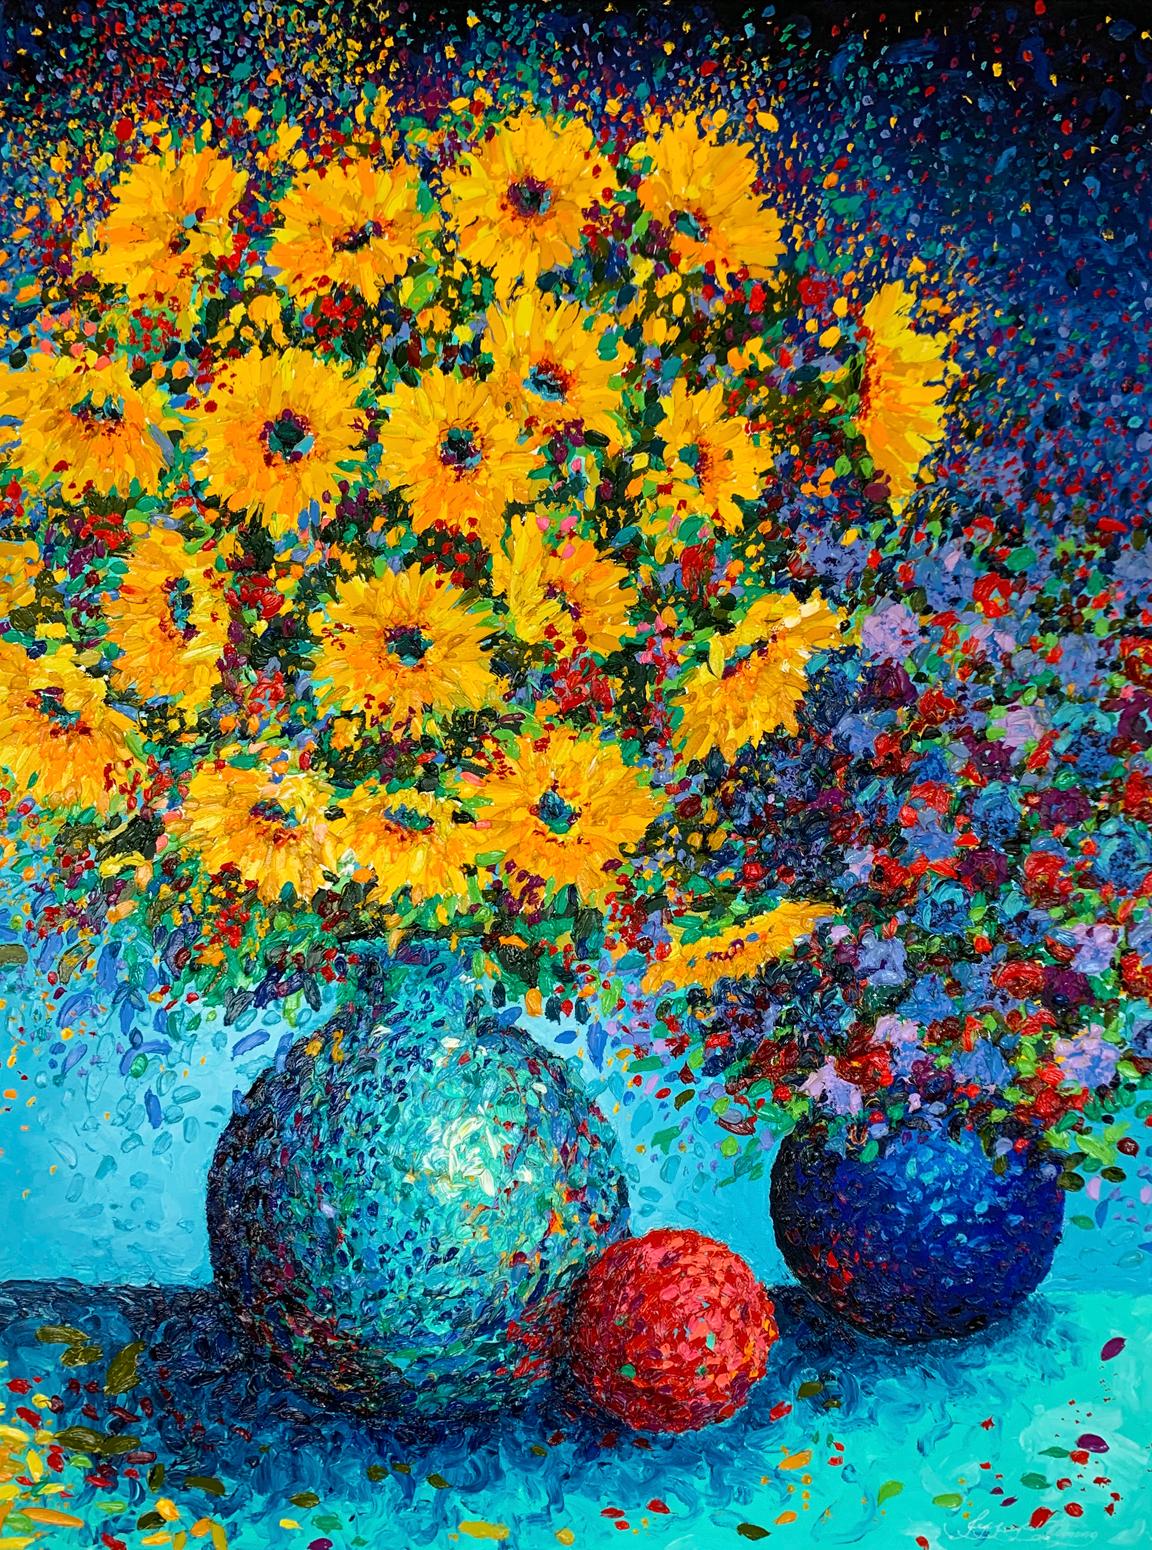 Sunflowers in Bloom, Oil Painting - Art by Jeff Fleming